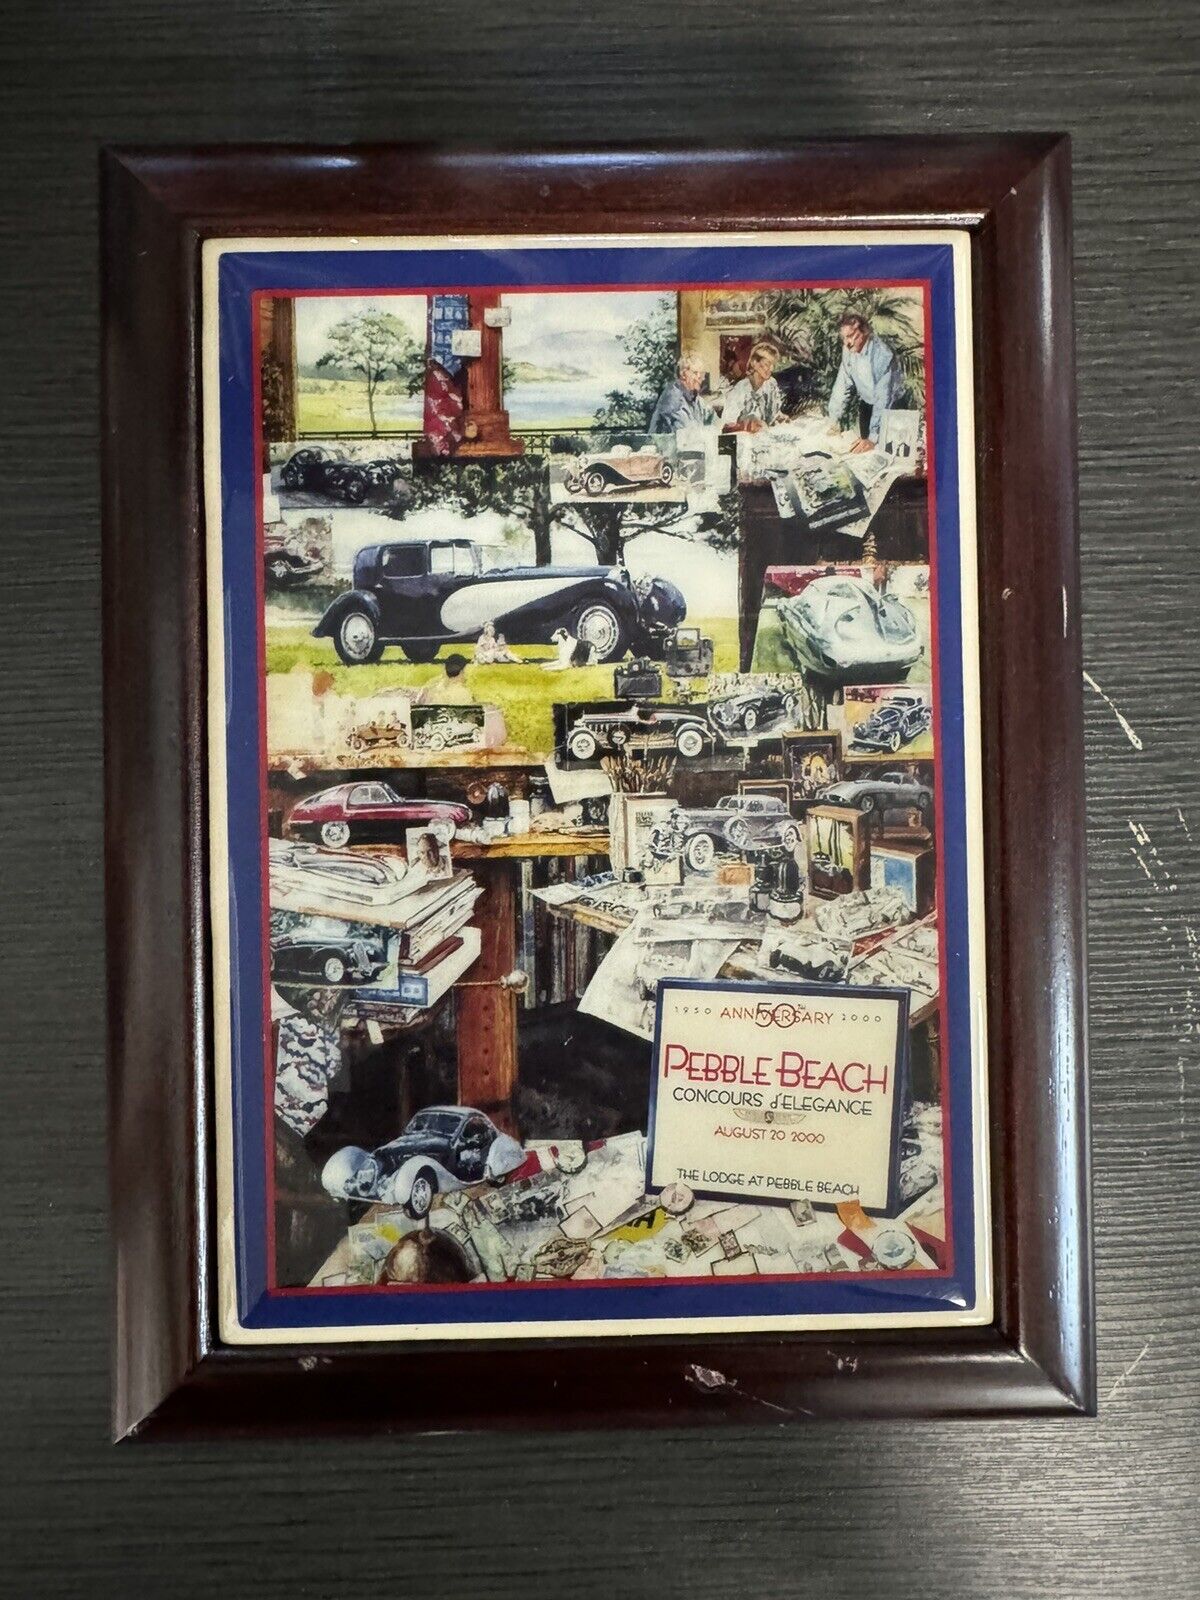 AUGUST 20, 2000 PEBBLE BEACH CONCOURS JEWELRY BOX 50th Annual, Collage